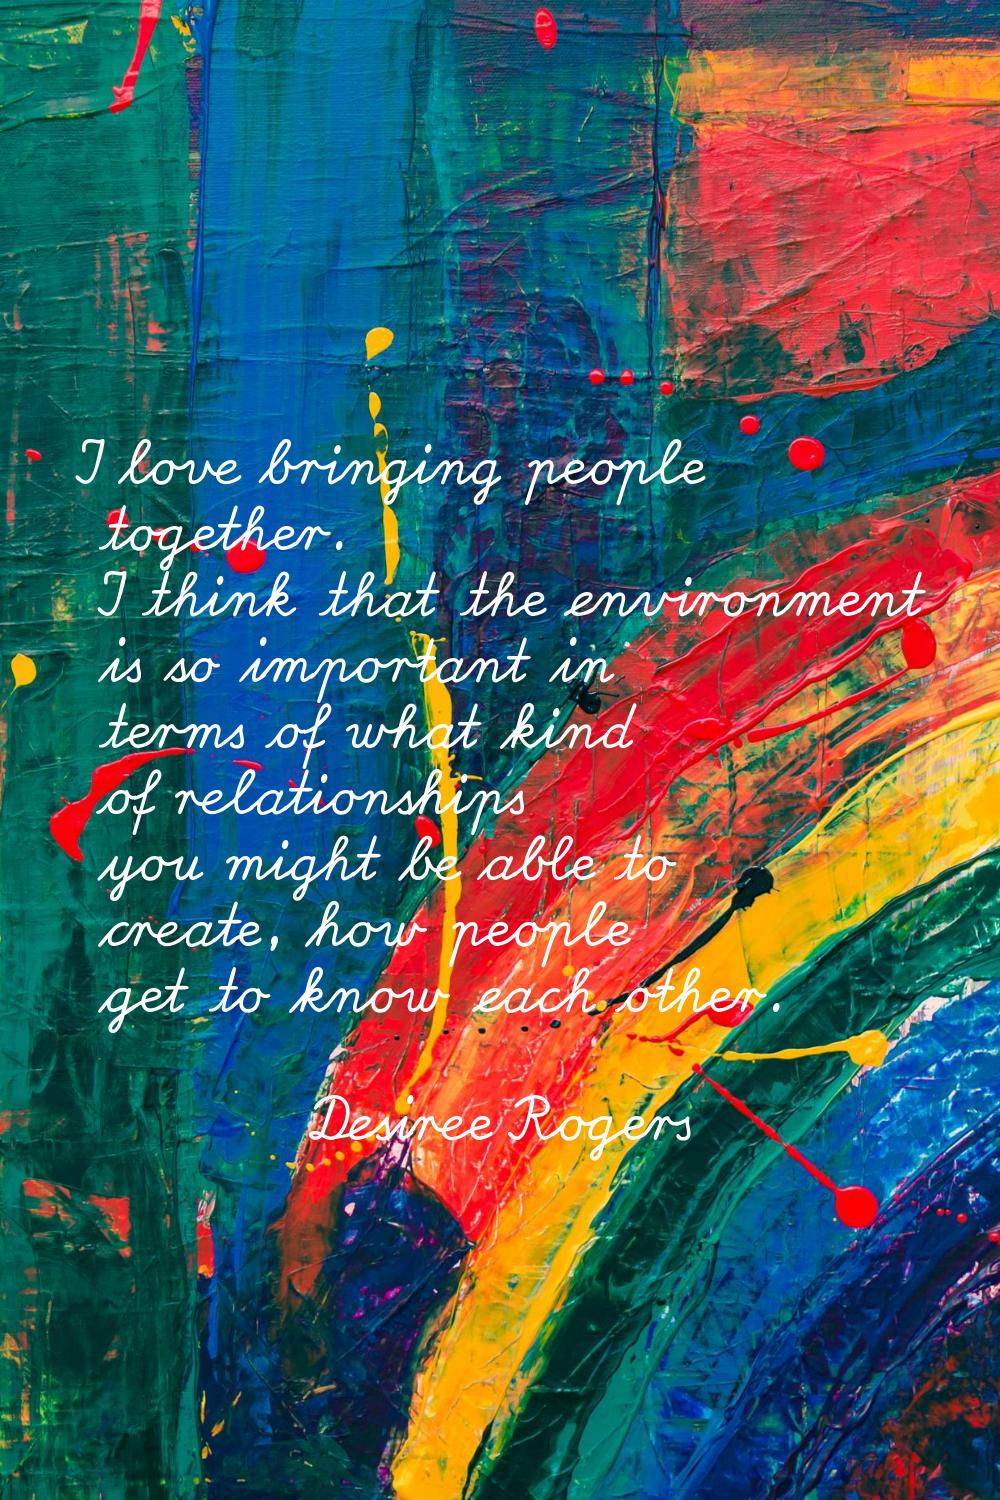 I love bringing people together. I think that the environment is so important in terms of what kind